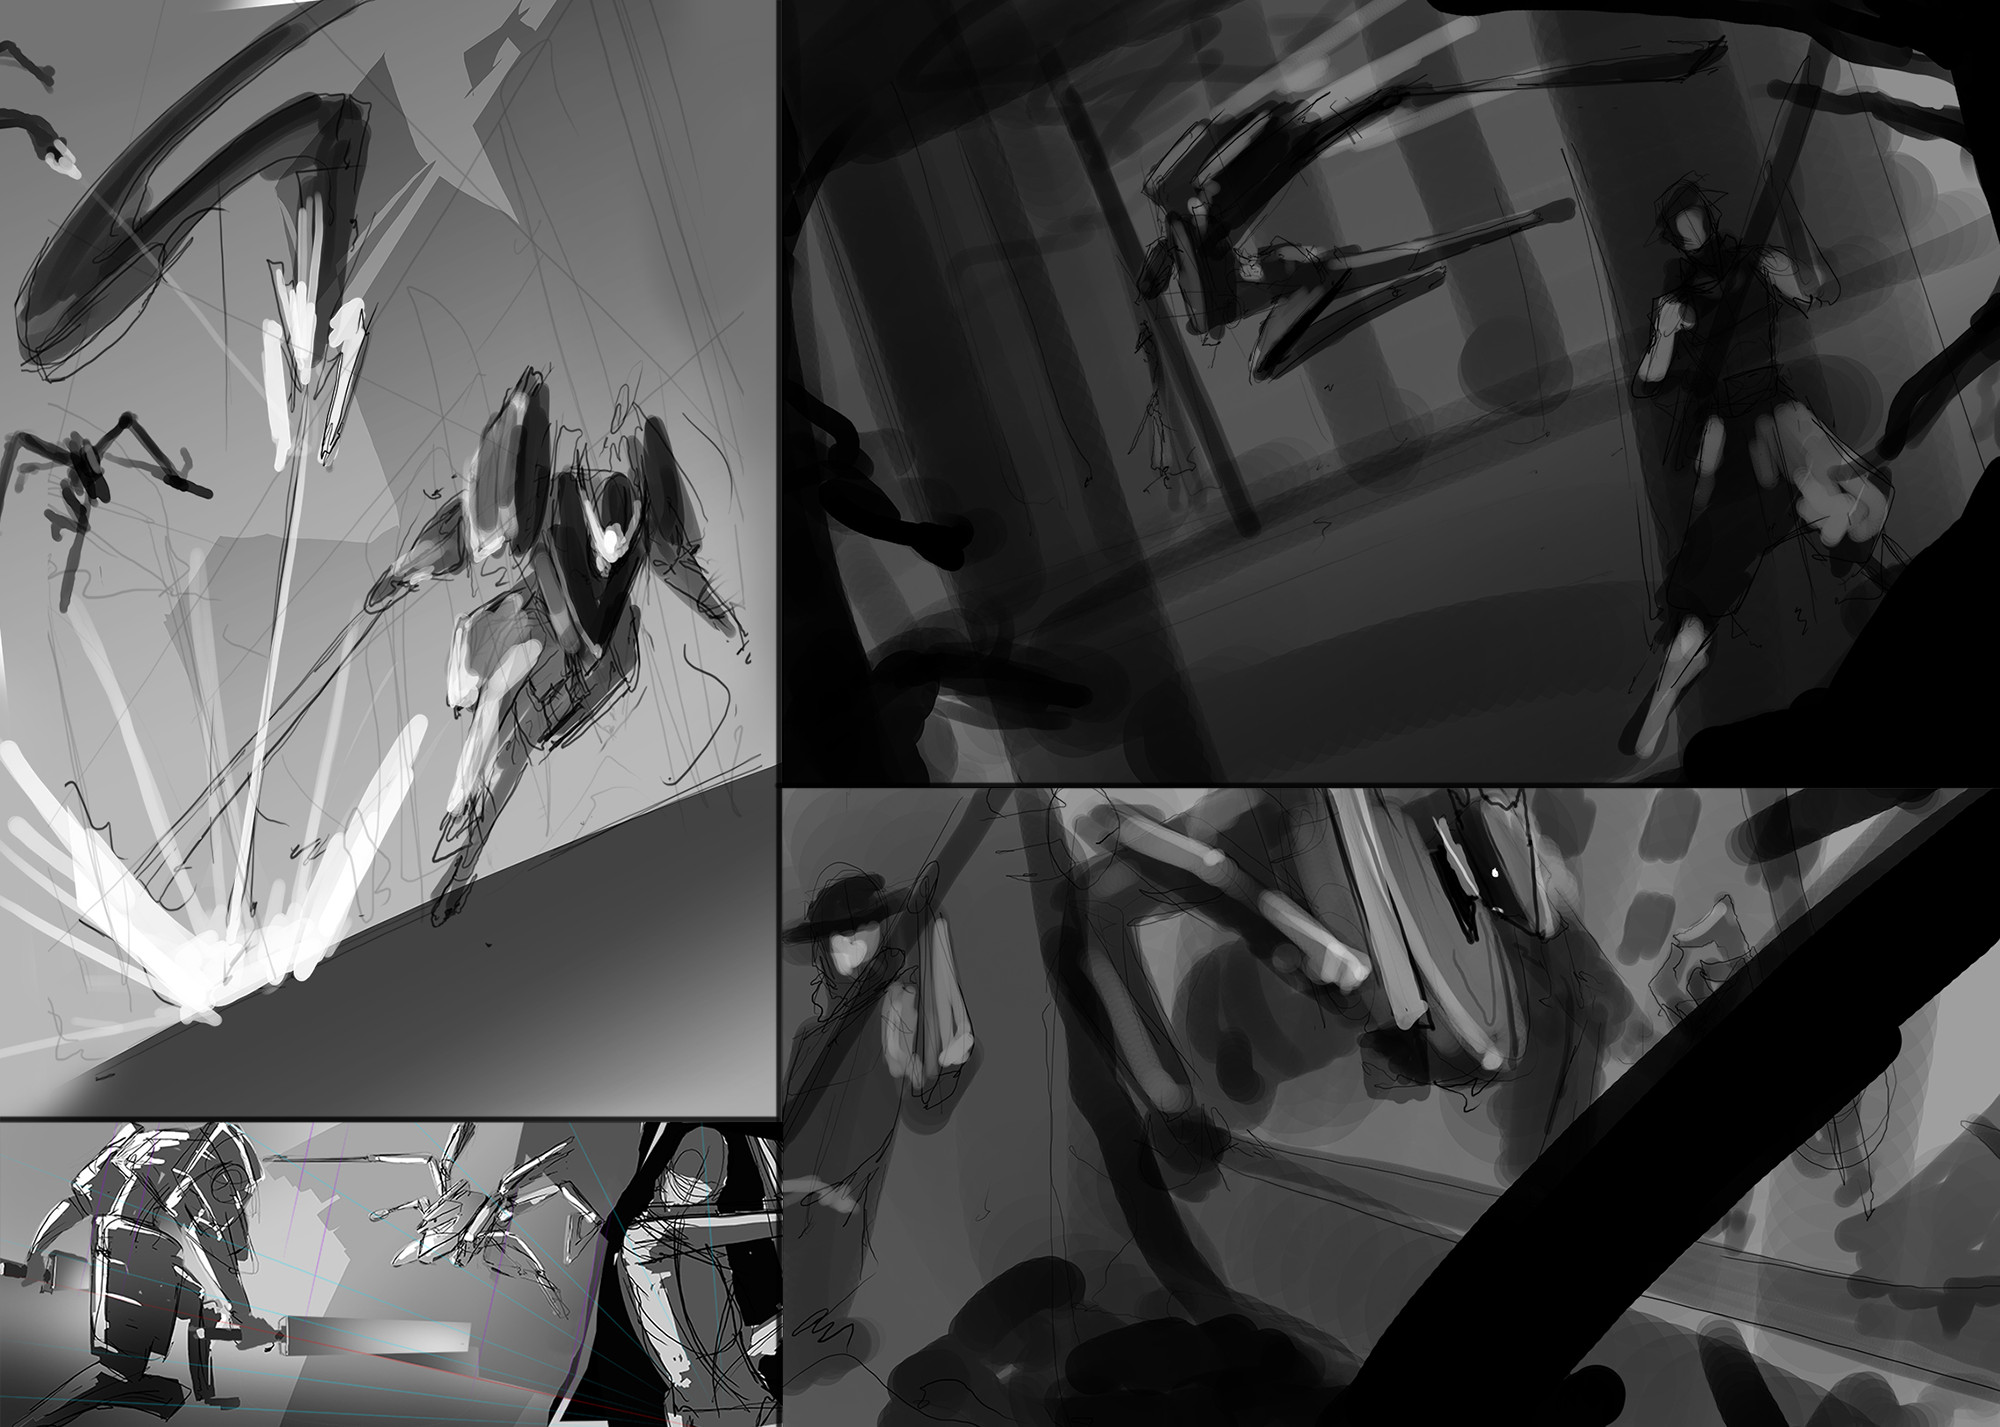 Composition Sketches for final image